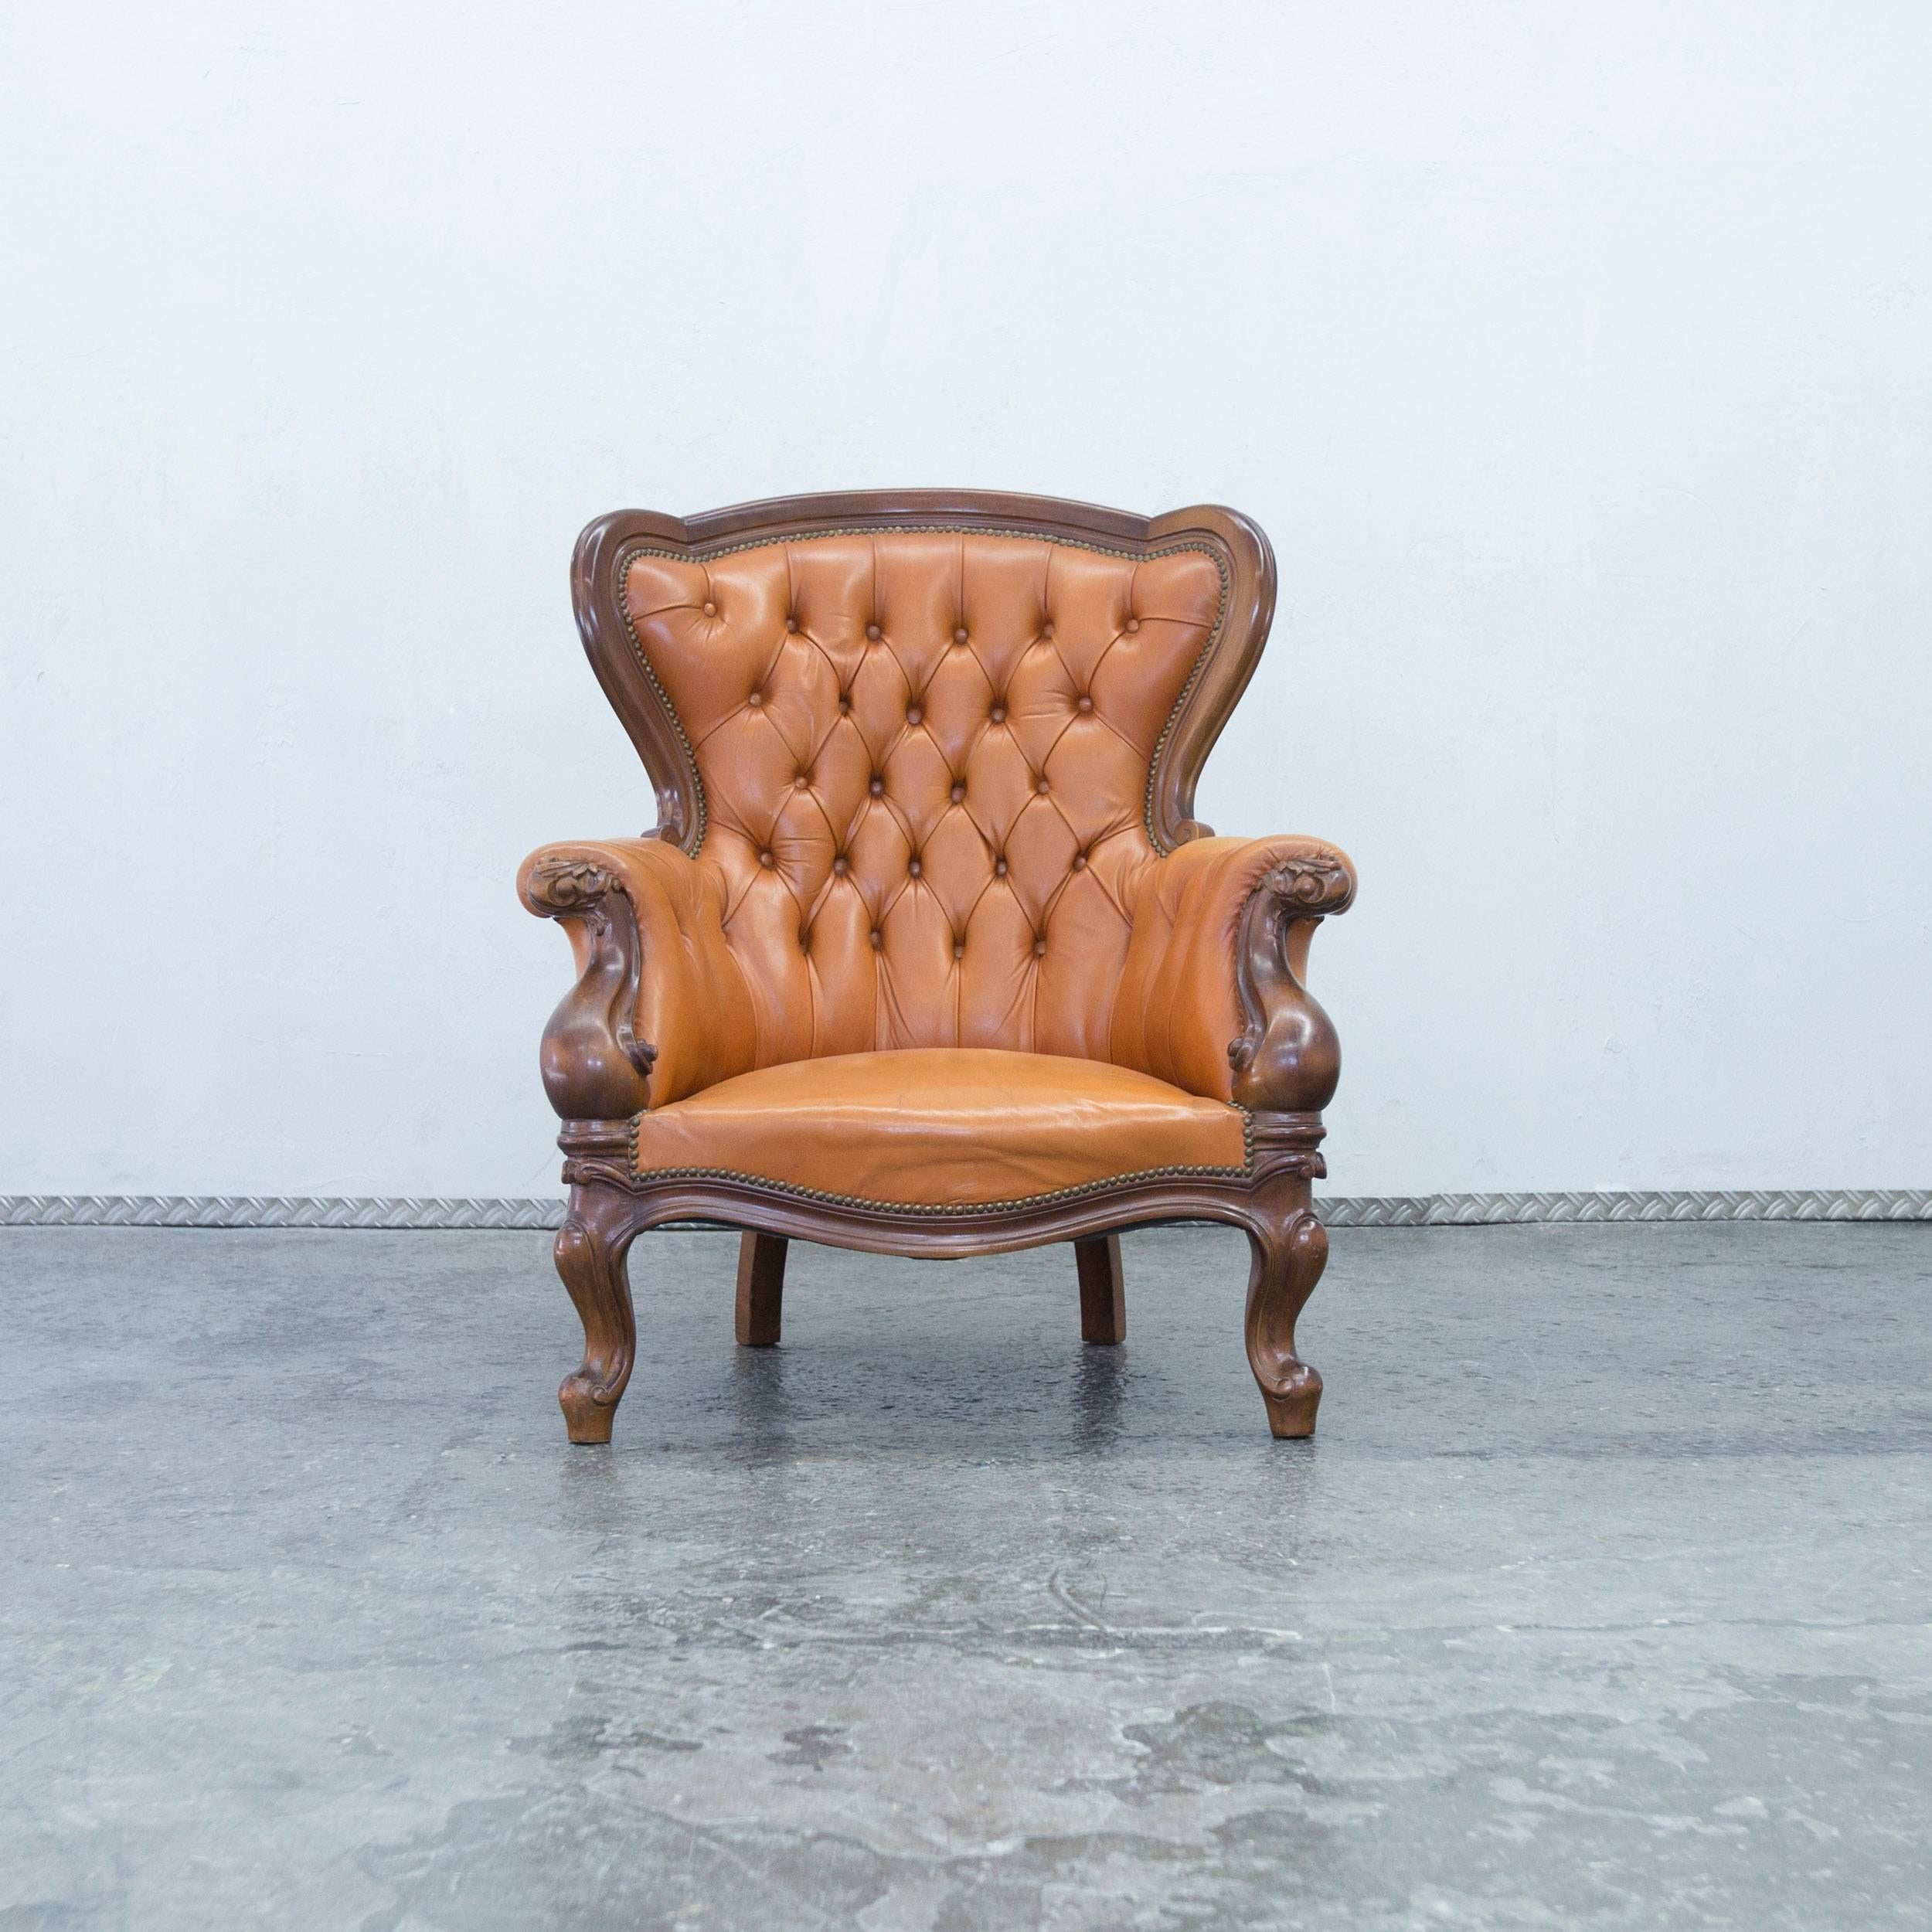 Orange brown colored Chesterfield leather armchair in a vintage design, made for pure comfort and elegance.